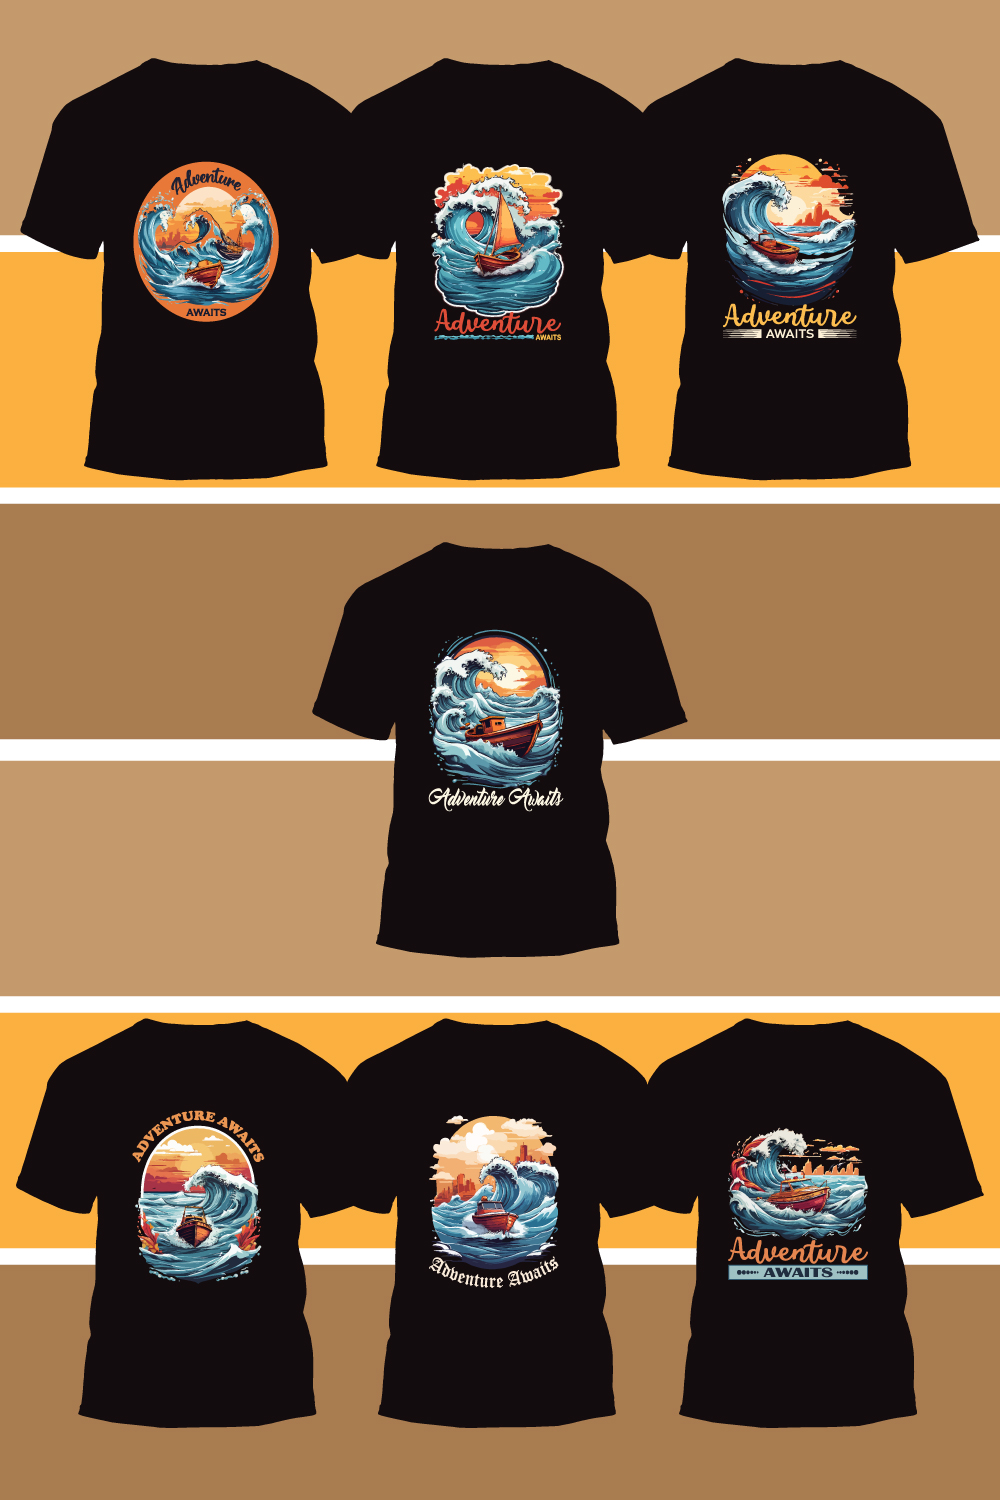 Adventure awaits t shirt design with a small boat riding the crest vector graphic for t-shirt prints, posters and other uses pinterest preview image.